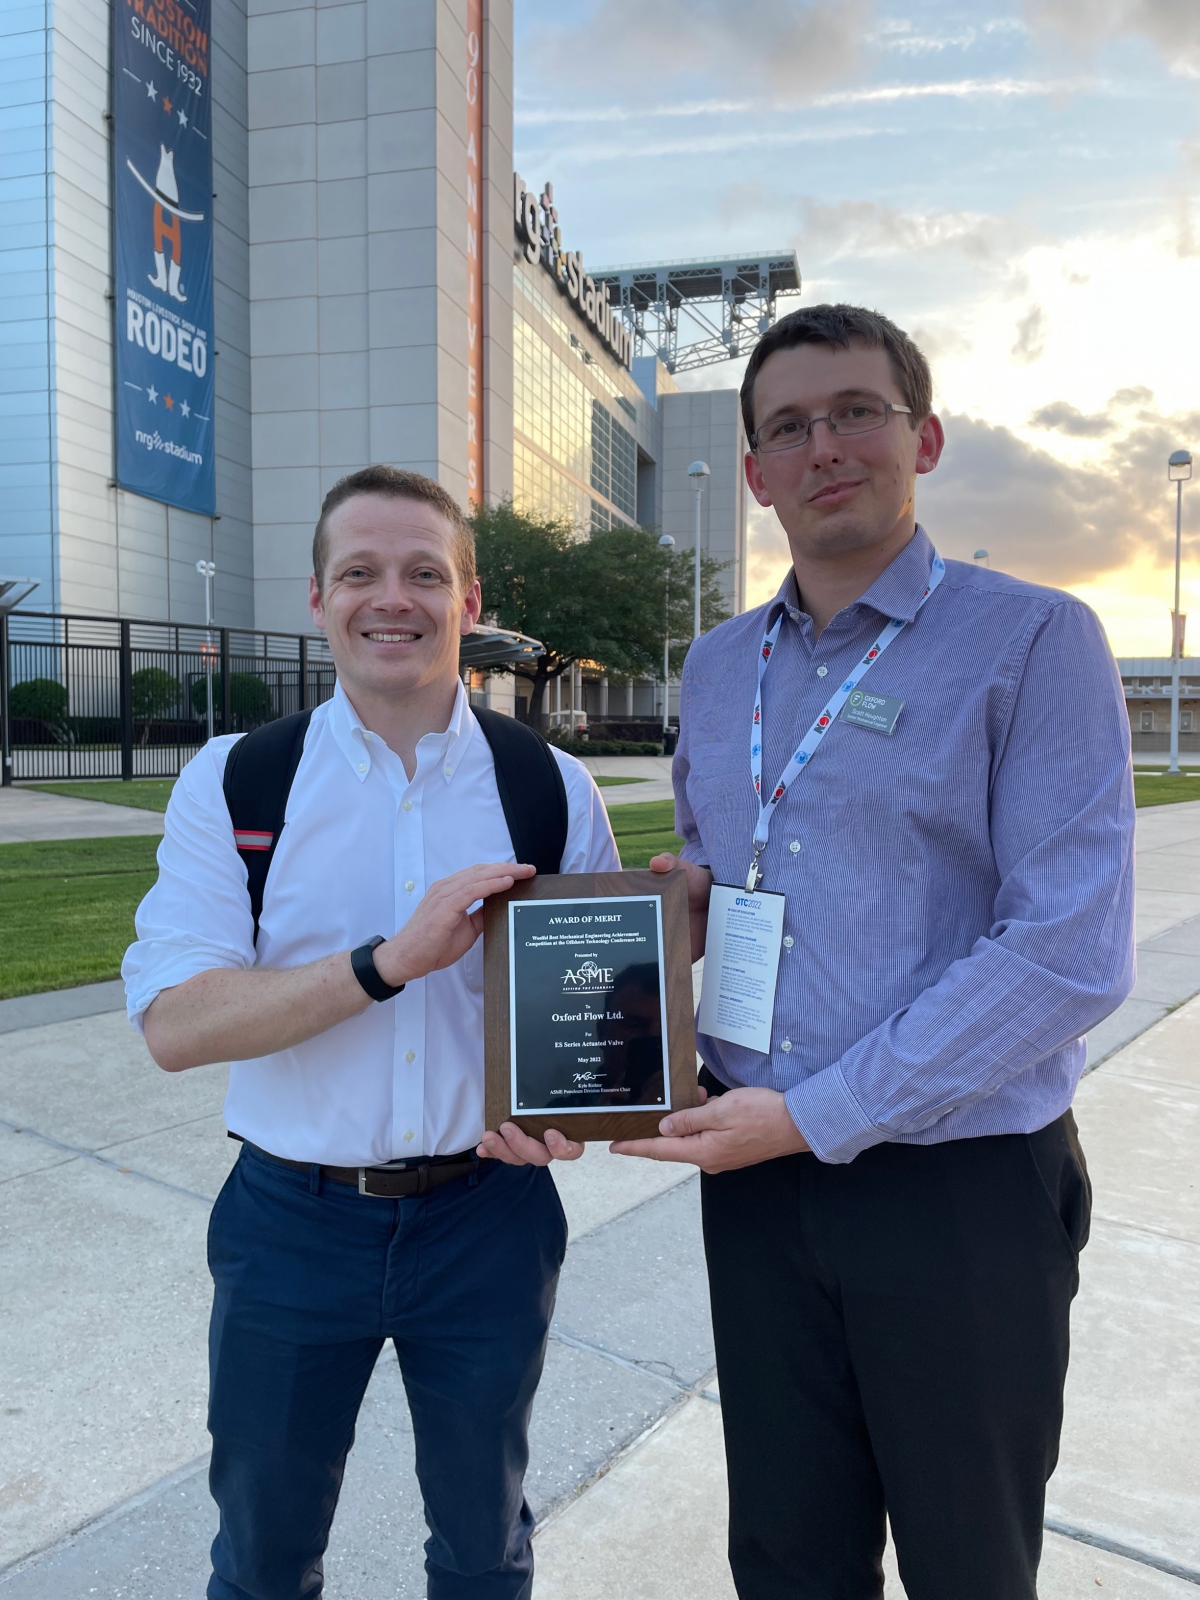 Dr Chris Kennell and Scott Houghton from Oxford Flow with ASME Award